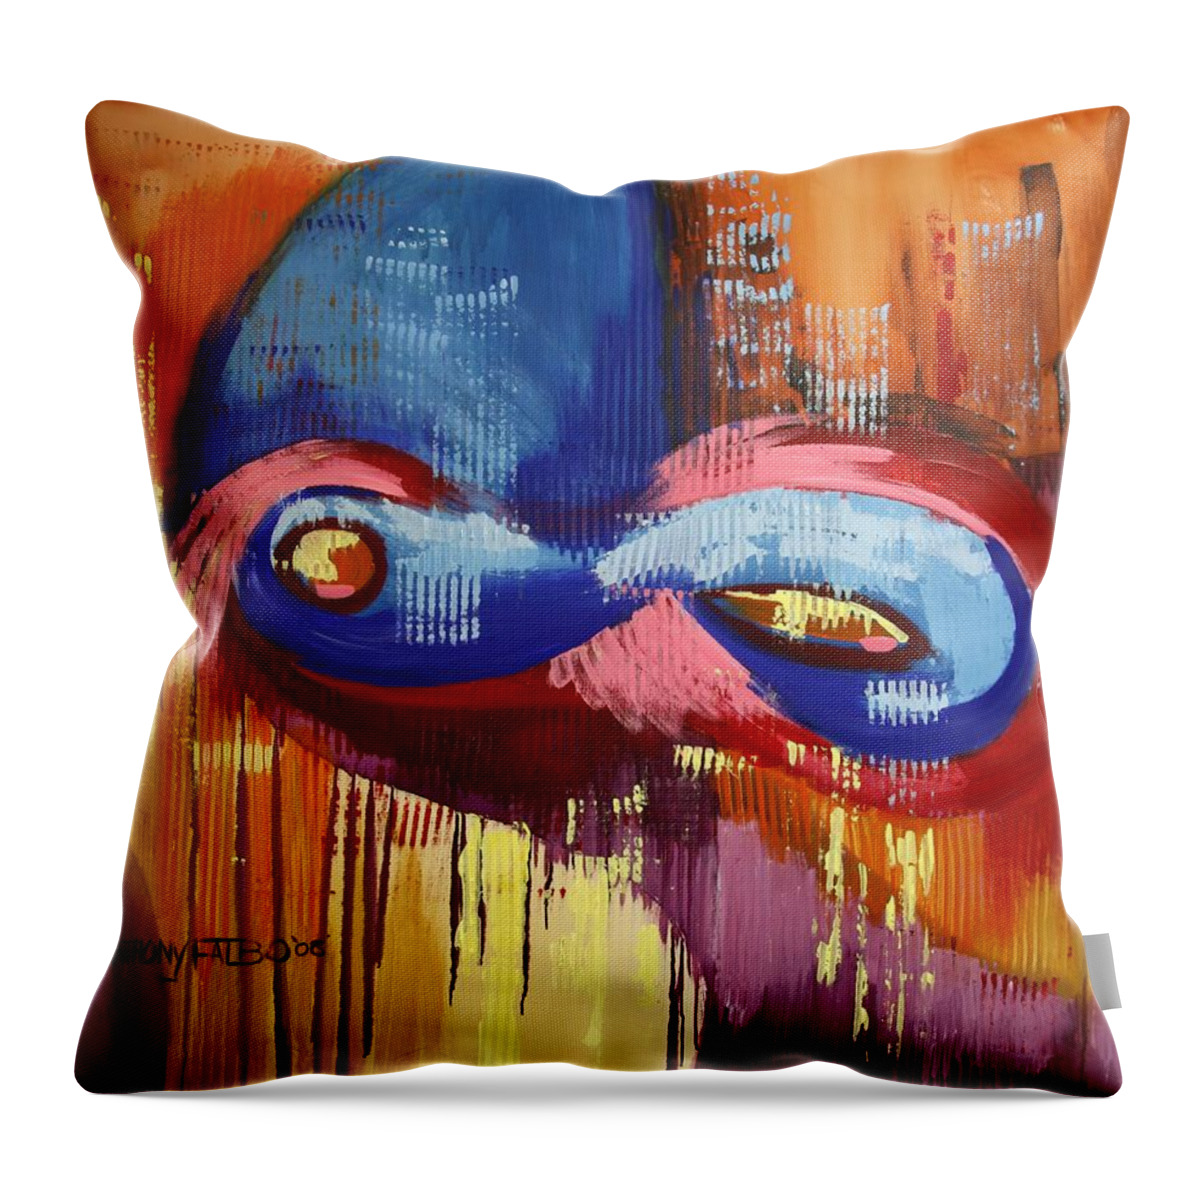 40 Days And 40 Nights Throw Pillow featuring the painting 40 Days And 40 Nights by Anthony Falbo